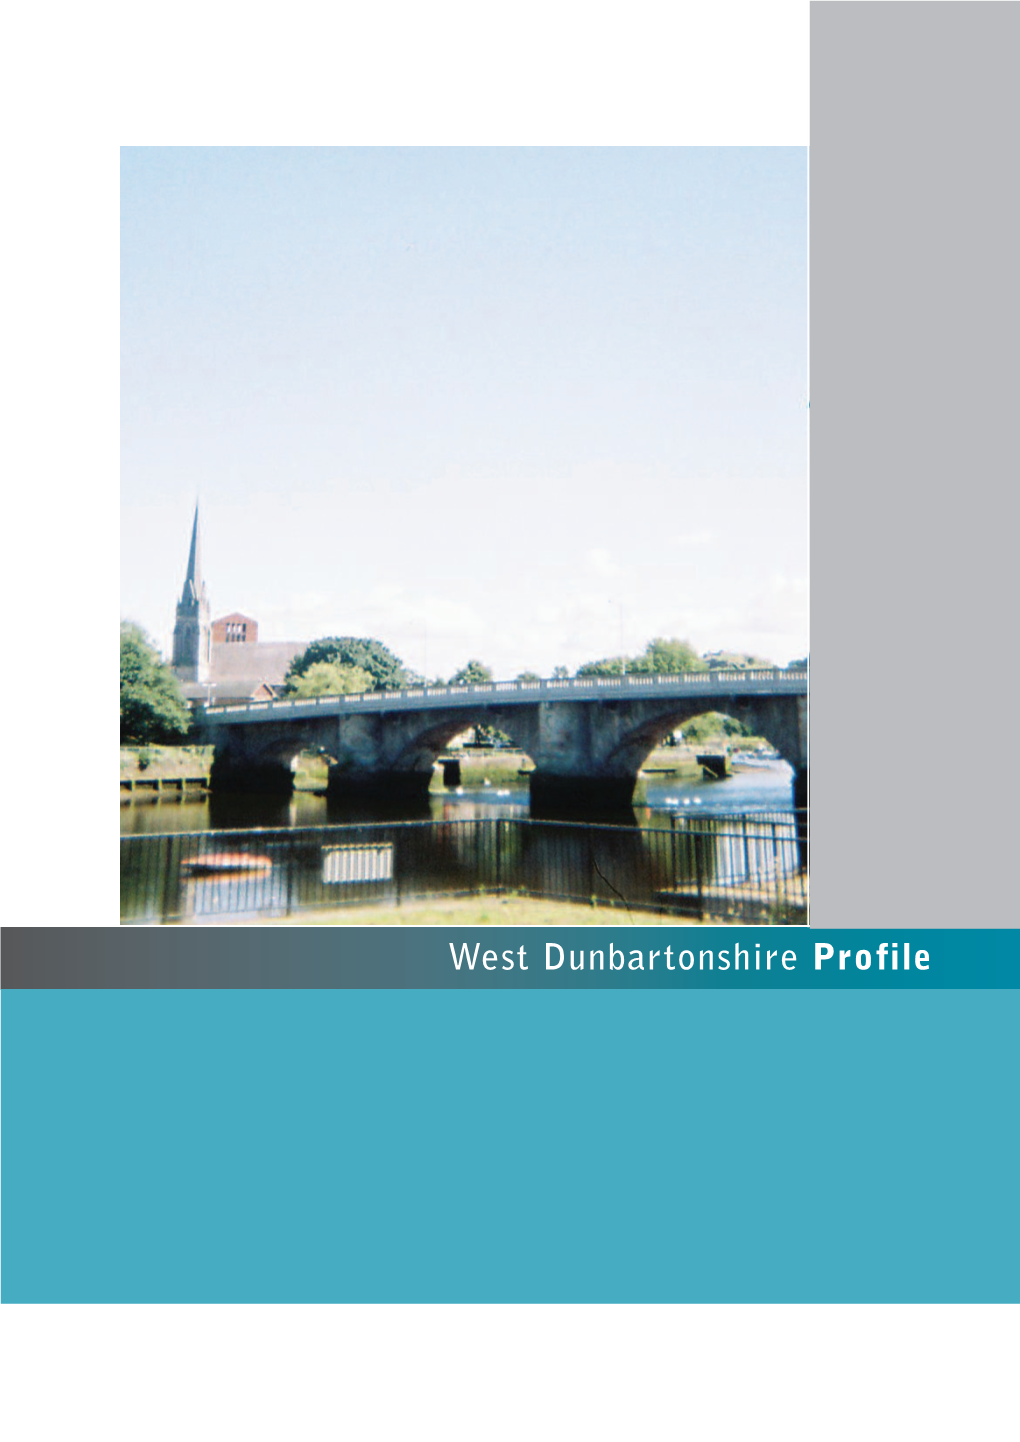 West Dunbartonshire Profile Cite This Report As: Shipton D and Whyte B